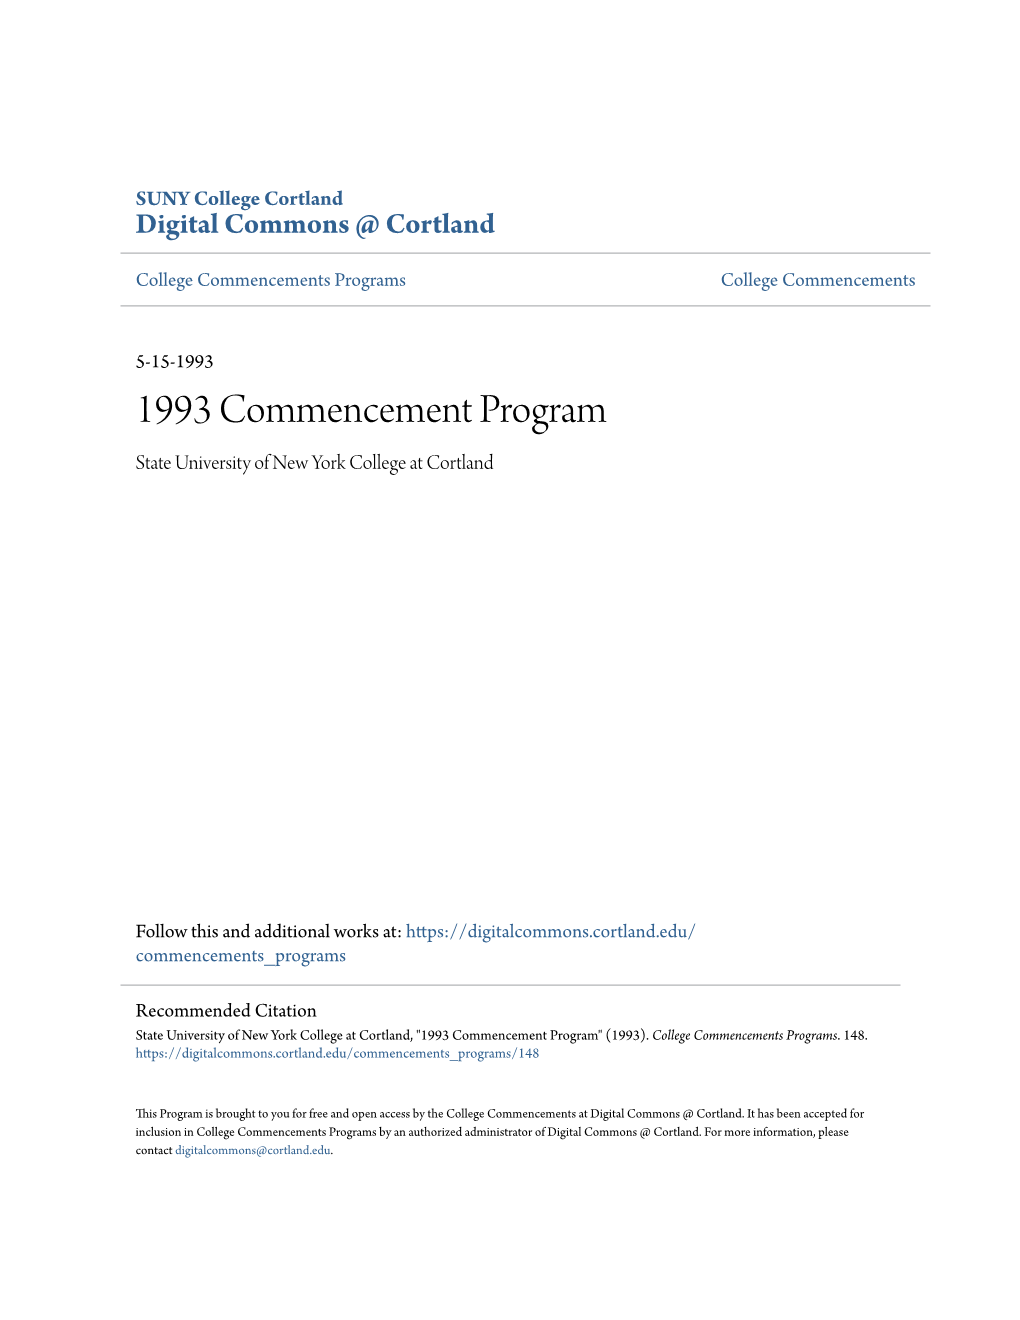 1993 Commencement Program State University of New York College at Cortland